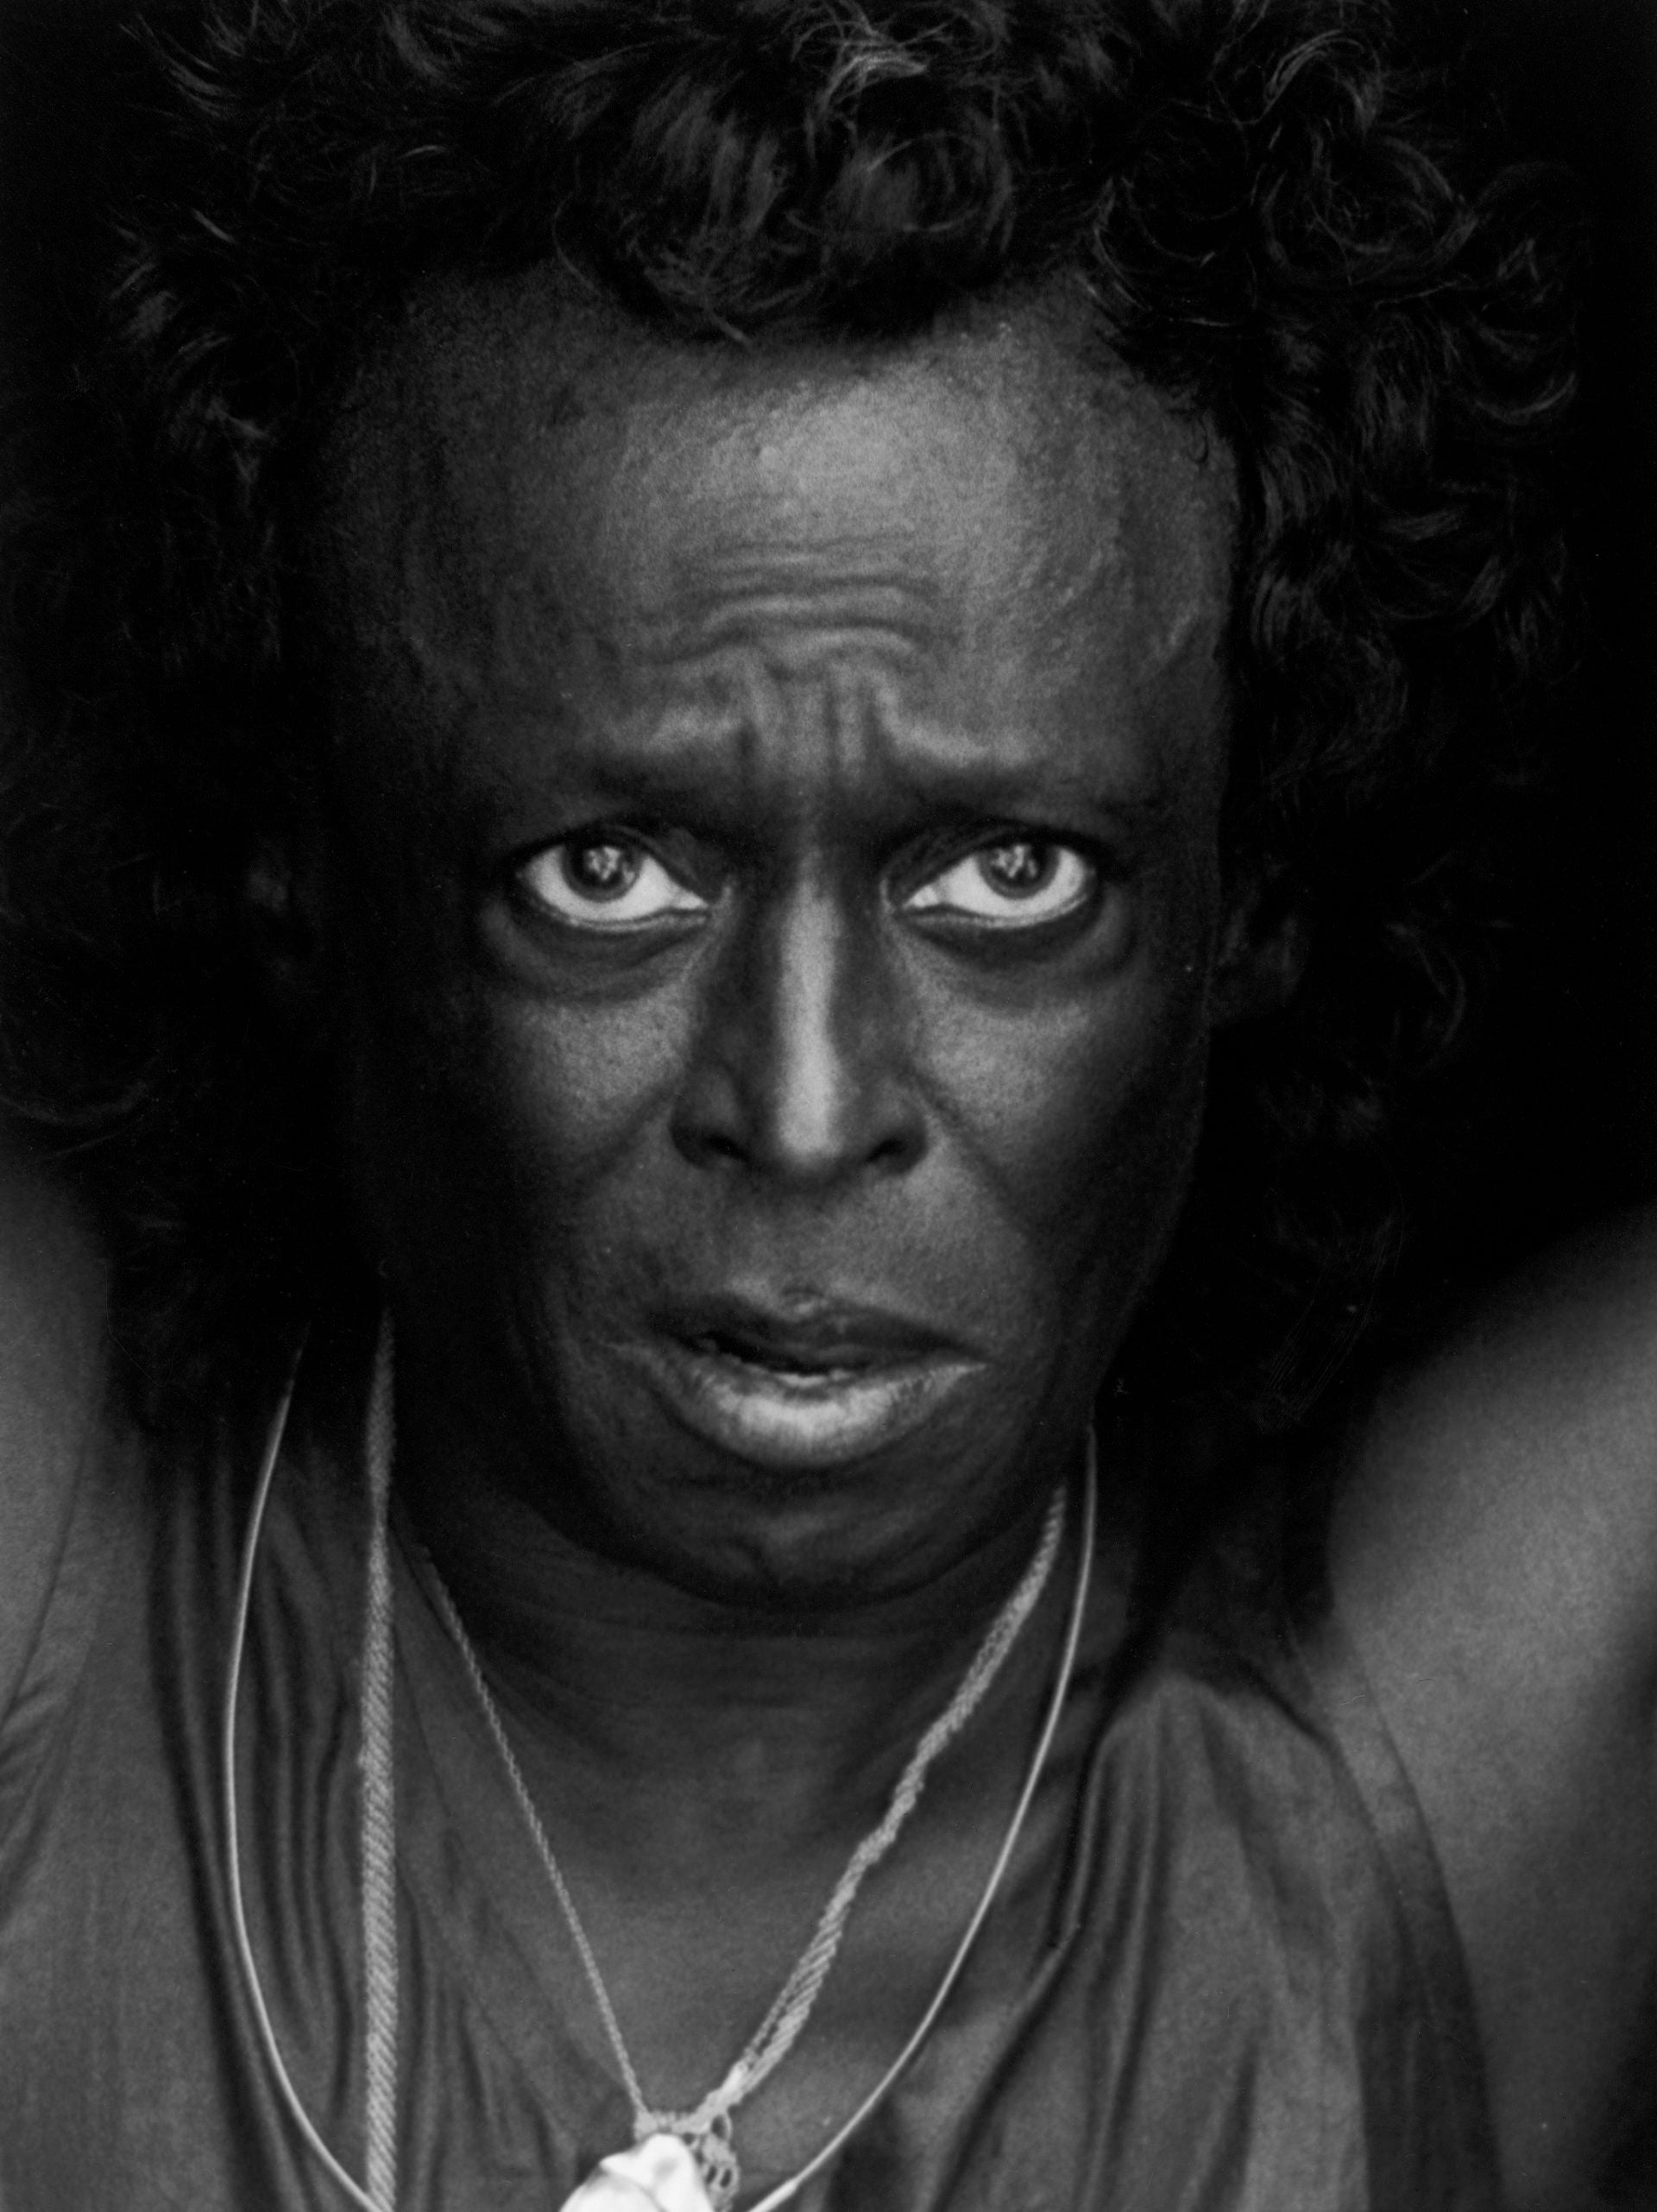 The Family Of Miles Davis Open Up About What We Can Expect From The New Documentary On His Life